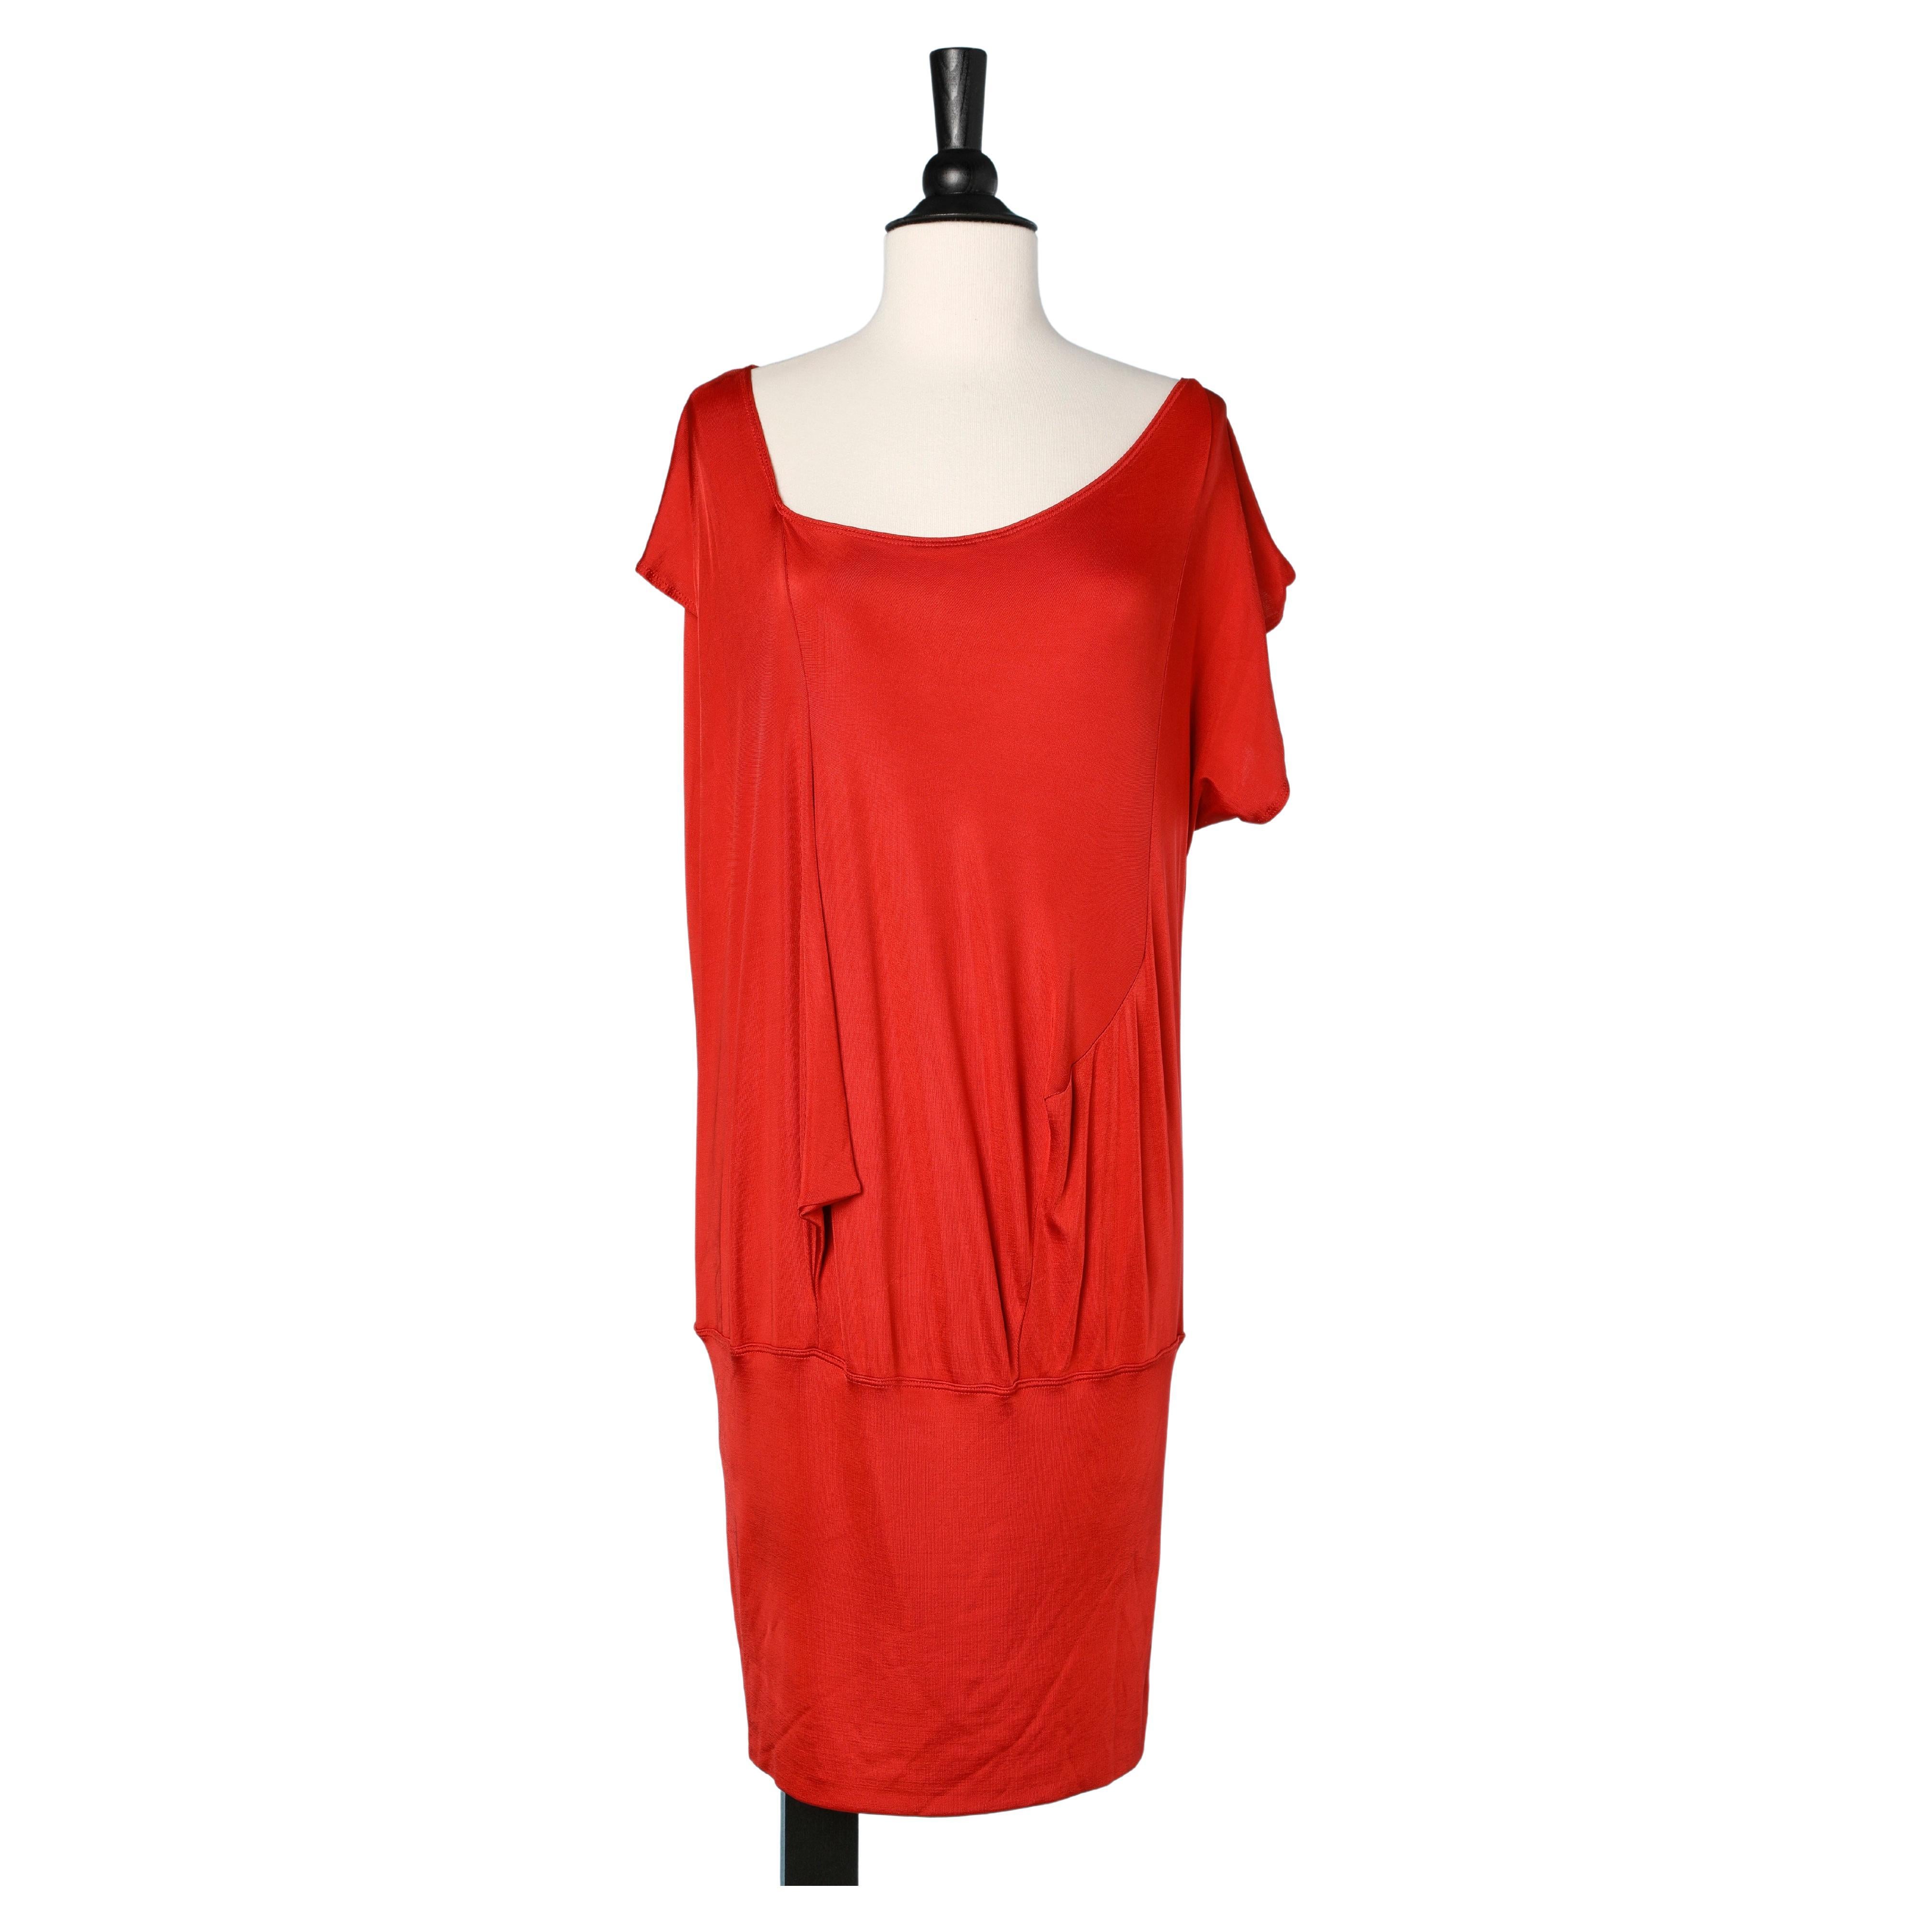 Red rayon jersey asymmetrical dress Anglomania by Vivienne Westwood  For Sale